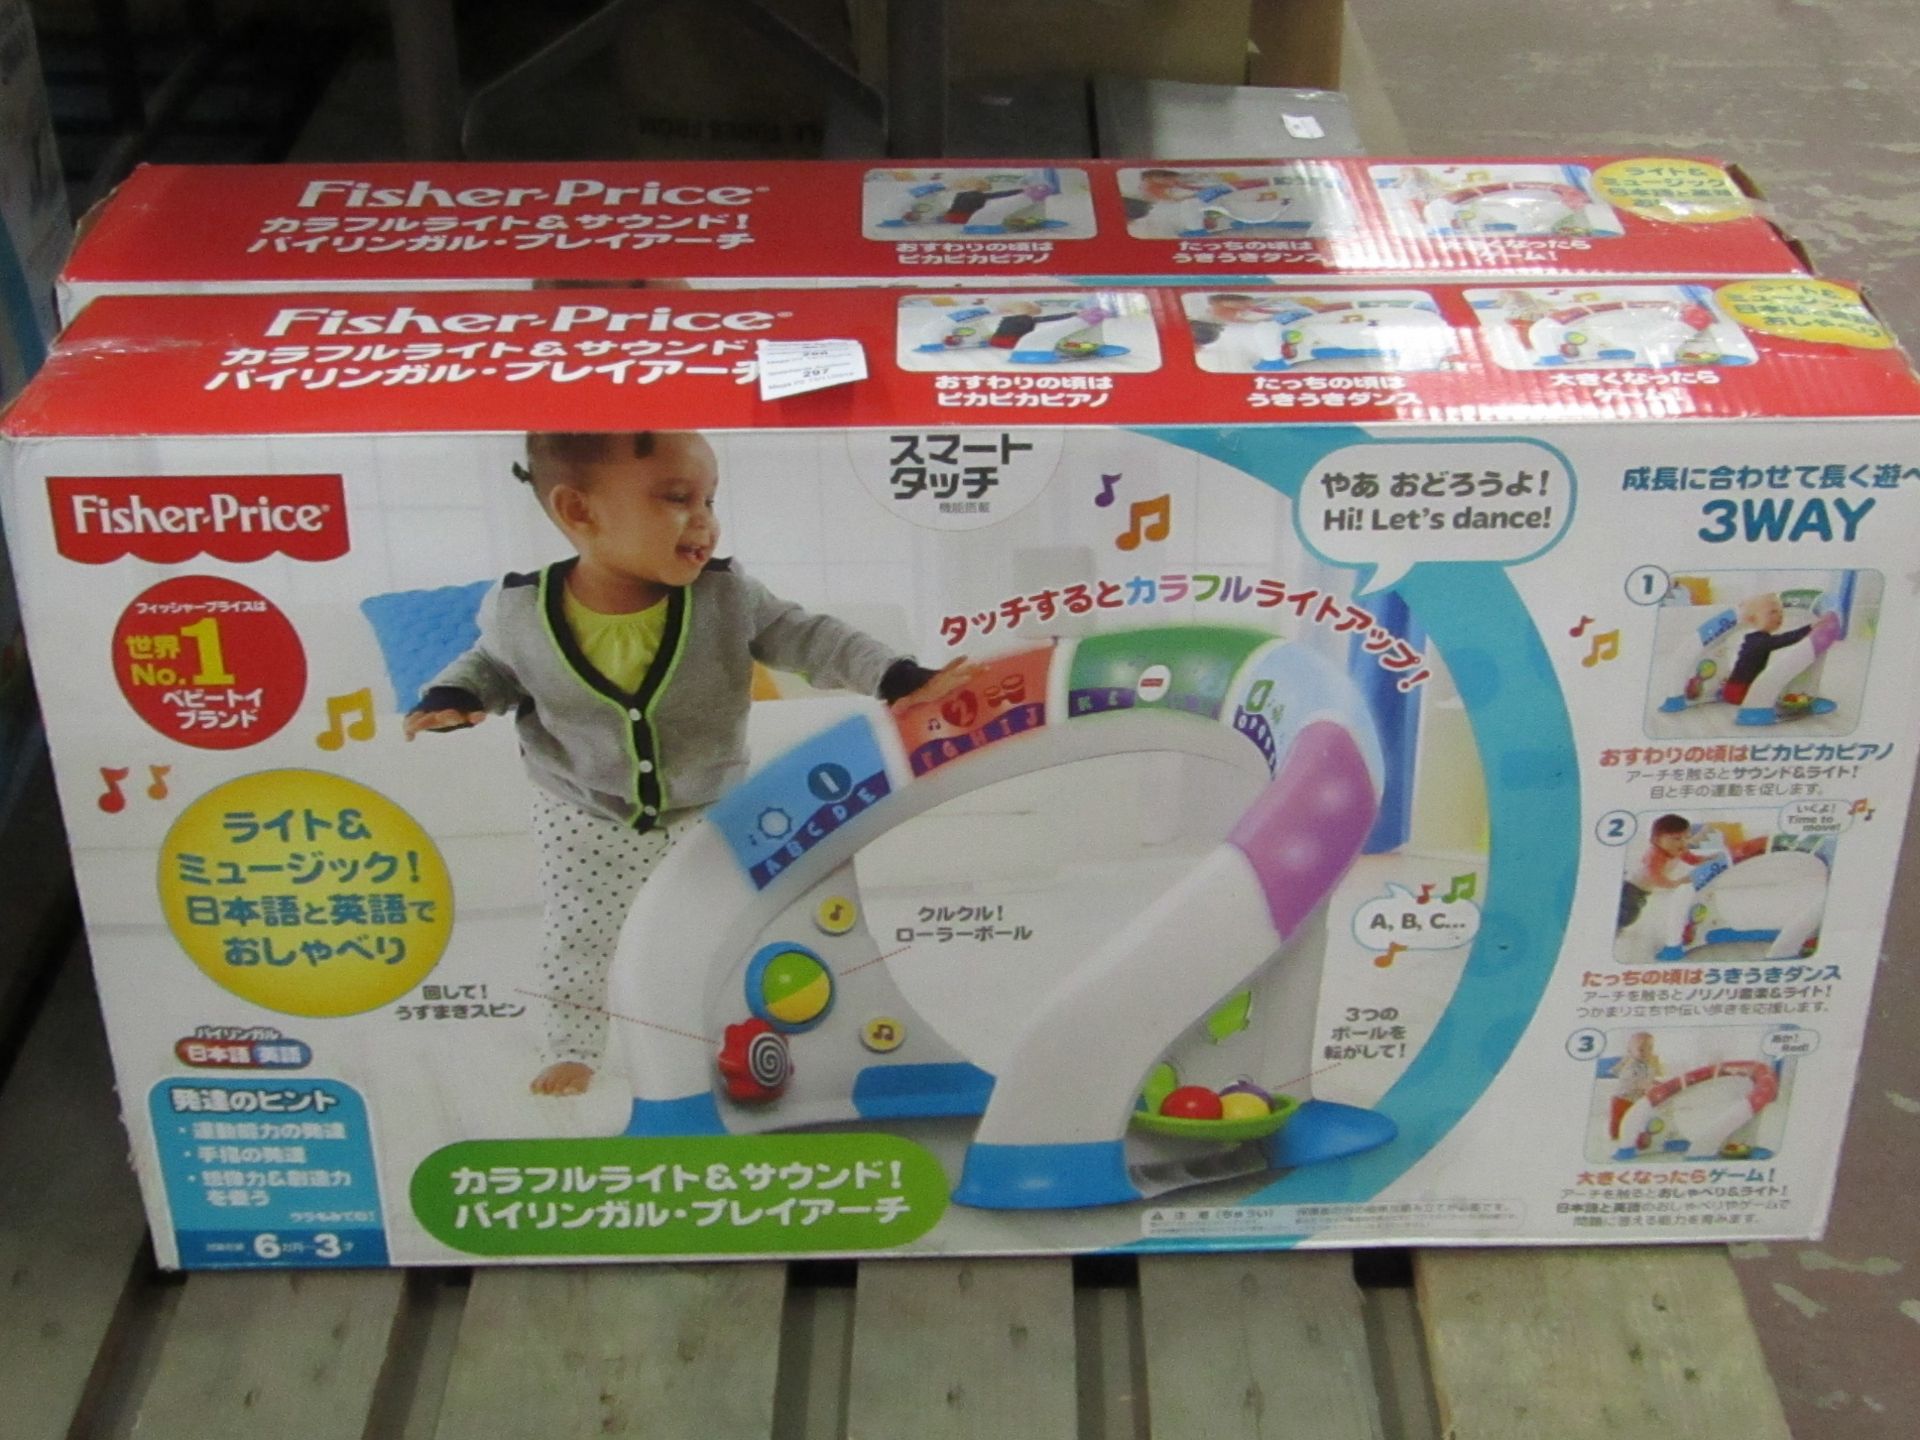 Fisher-price bright beats smart touch playset. Box is in foreign language. Unchecked and boxed.